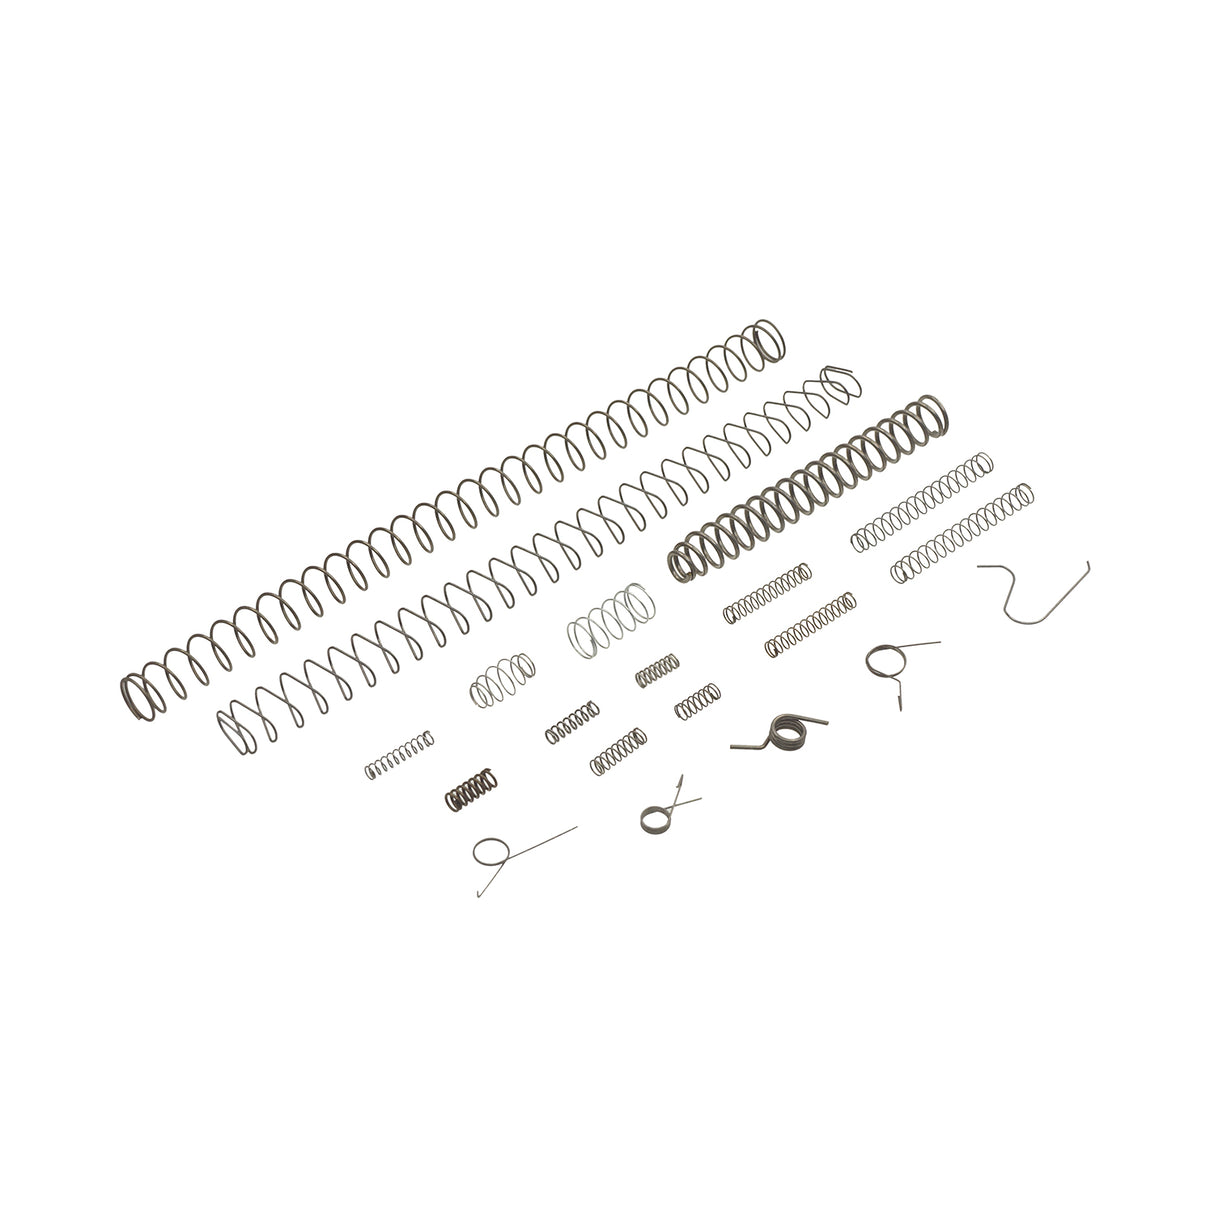 Double Bell Original Replacement Spring Set for 736 M9 GBB ( M92-TH )